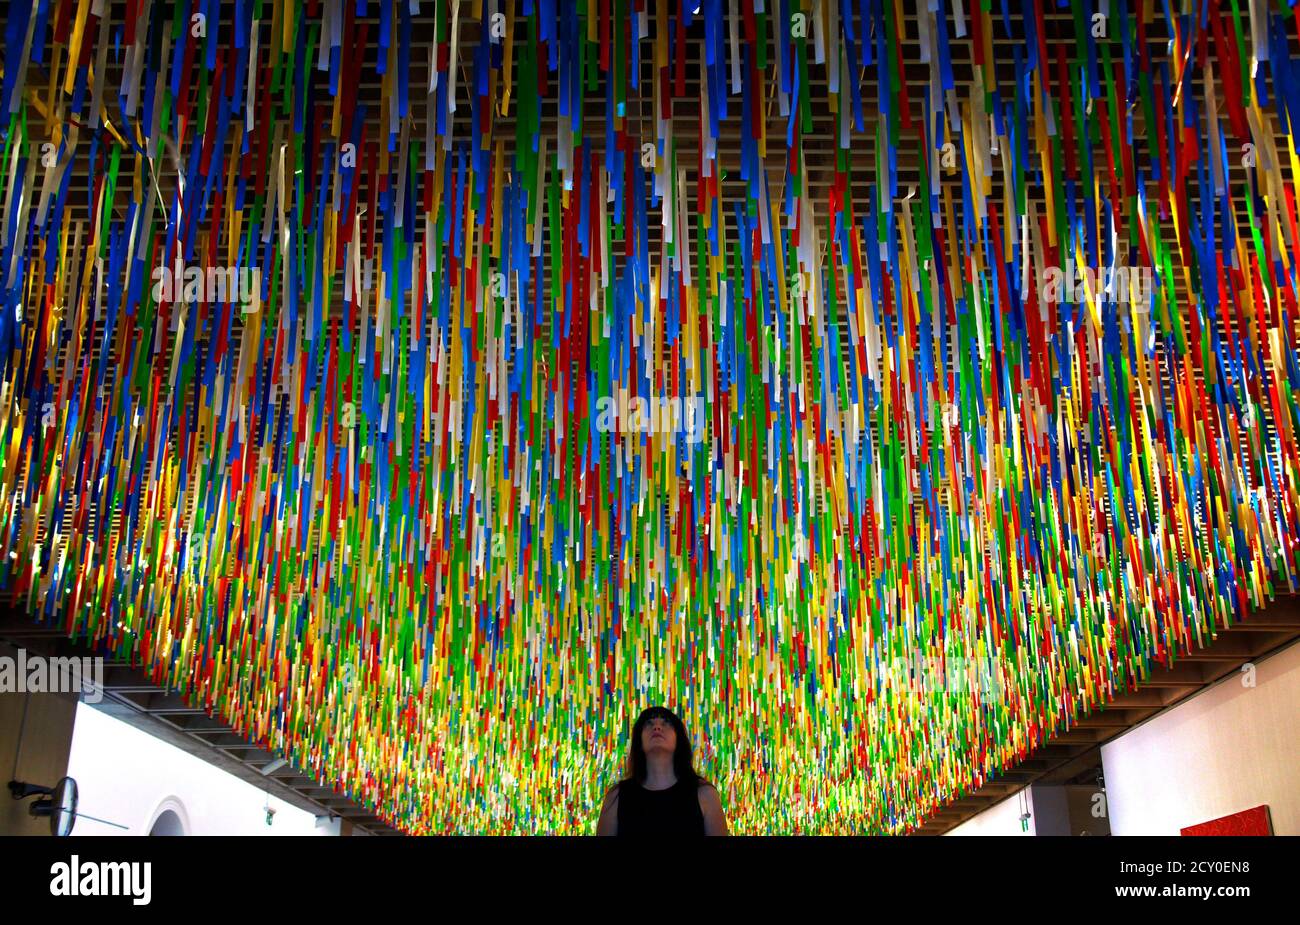 Hospital ekstremt Held og lykke Australian artist Nike Savvas inspects her artwork titled 'Rally' that  hangs from the roof of the New South Wales Art Gallery April 7, 2014.  Savvas says her hanging installation, which is made